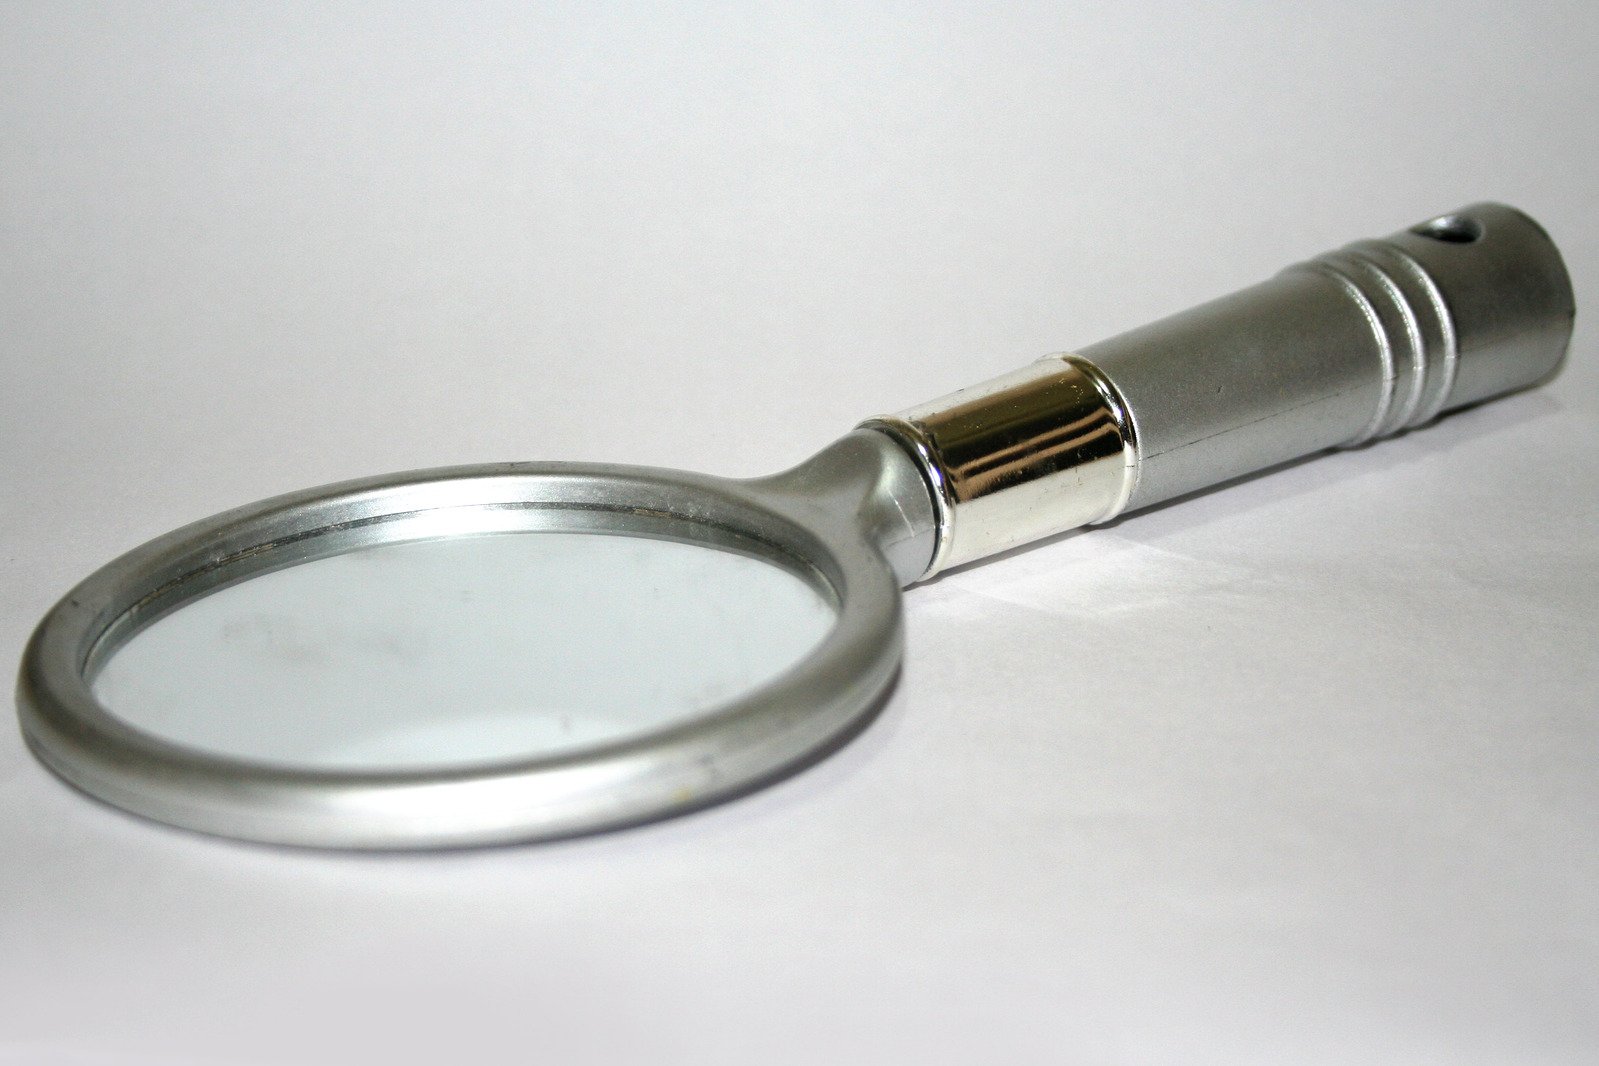 a magnifying glass with the light off